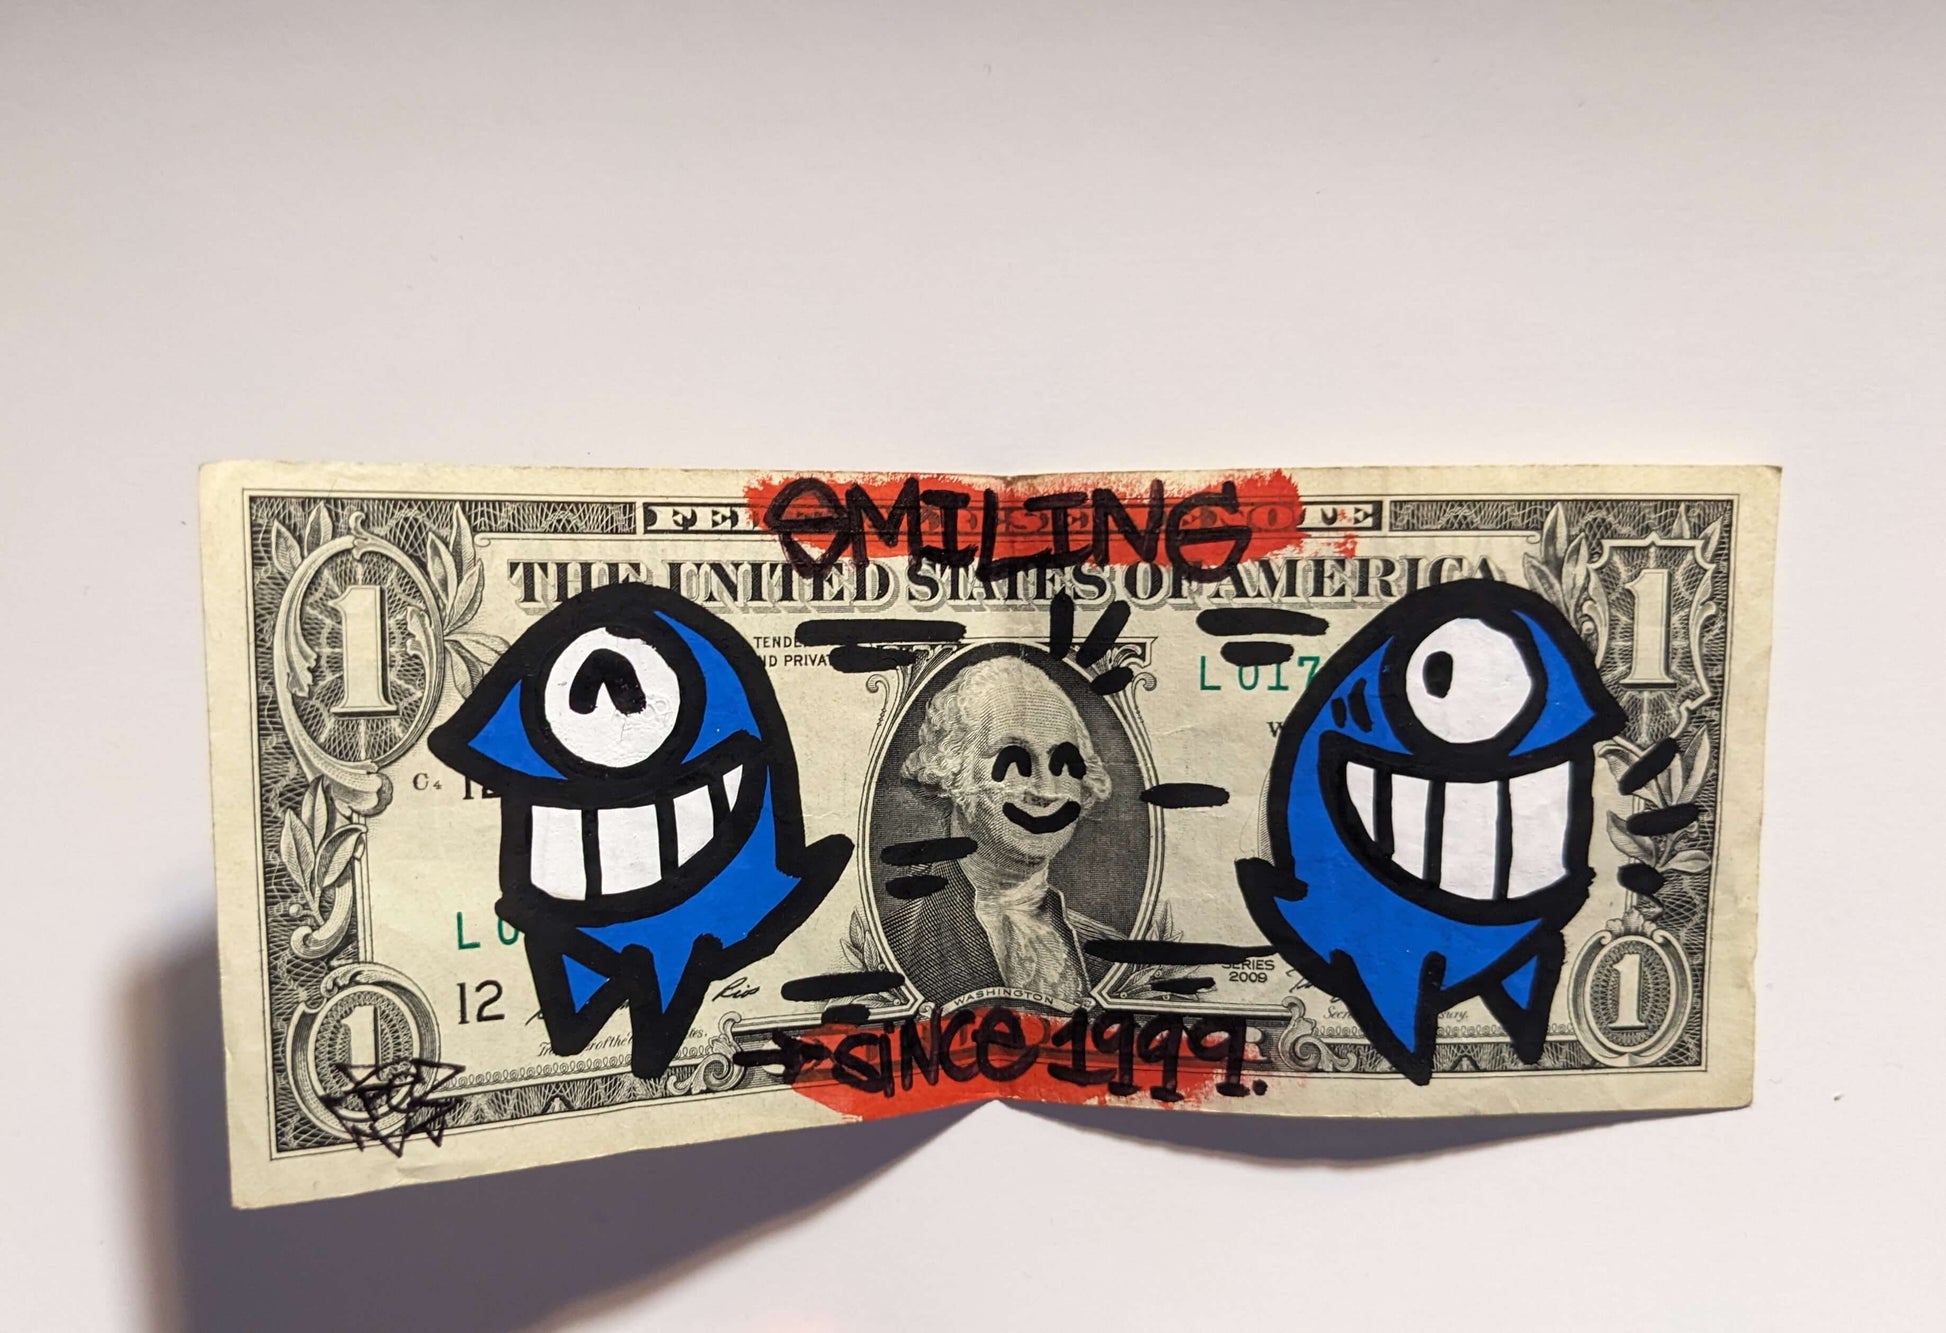 Pez - "PE$" (Smiling since 1999) one dollar note